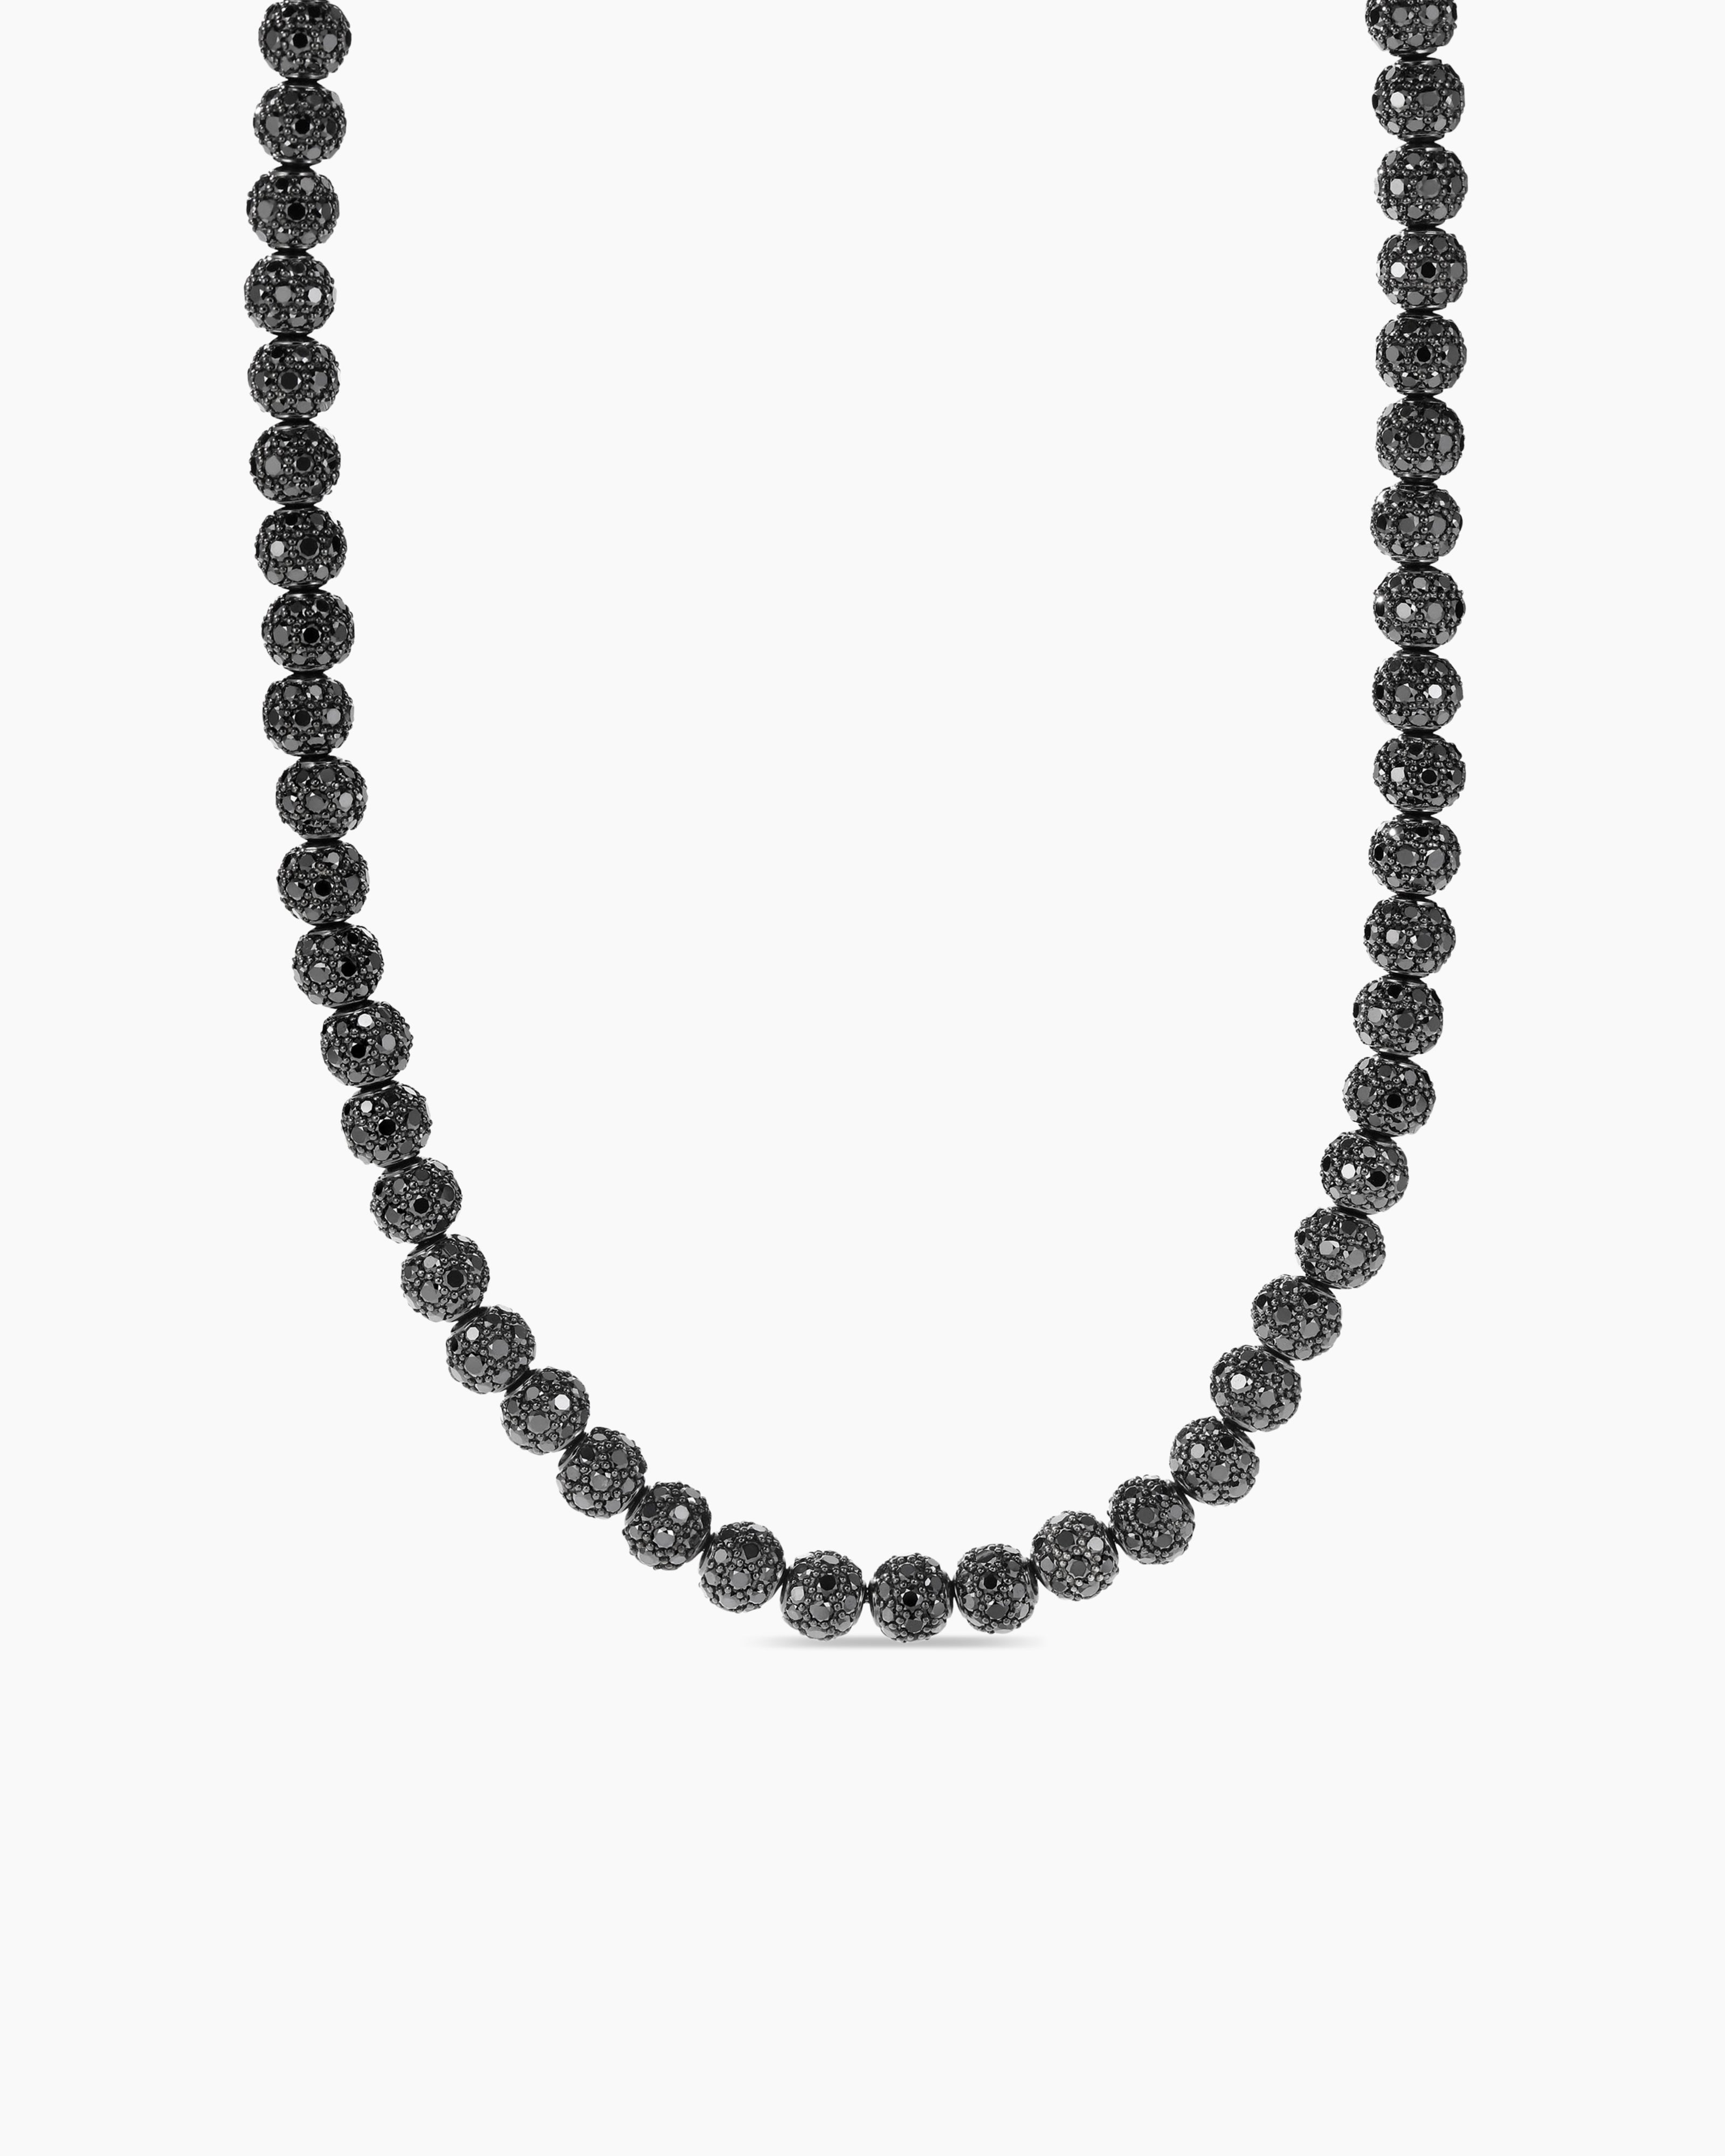 Black Onyx and Sterling Silver Bead Necklace, Earring, and Bracelet Set -  Sam's Club